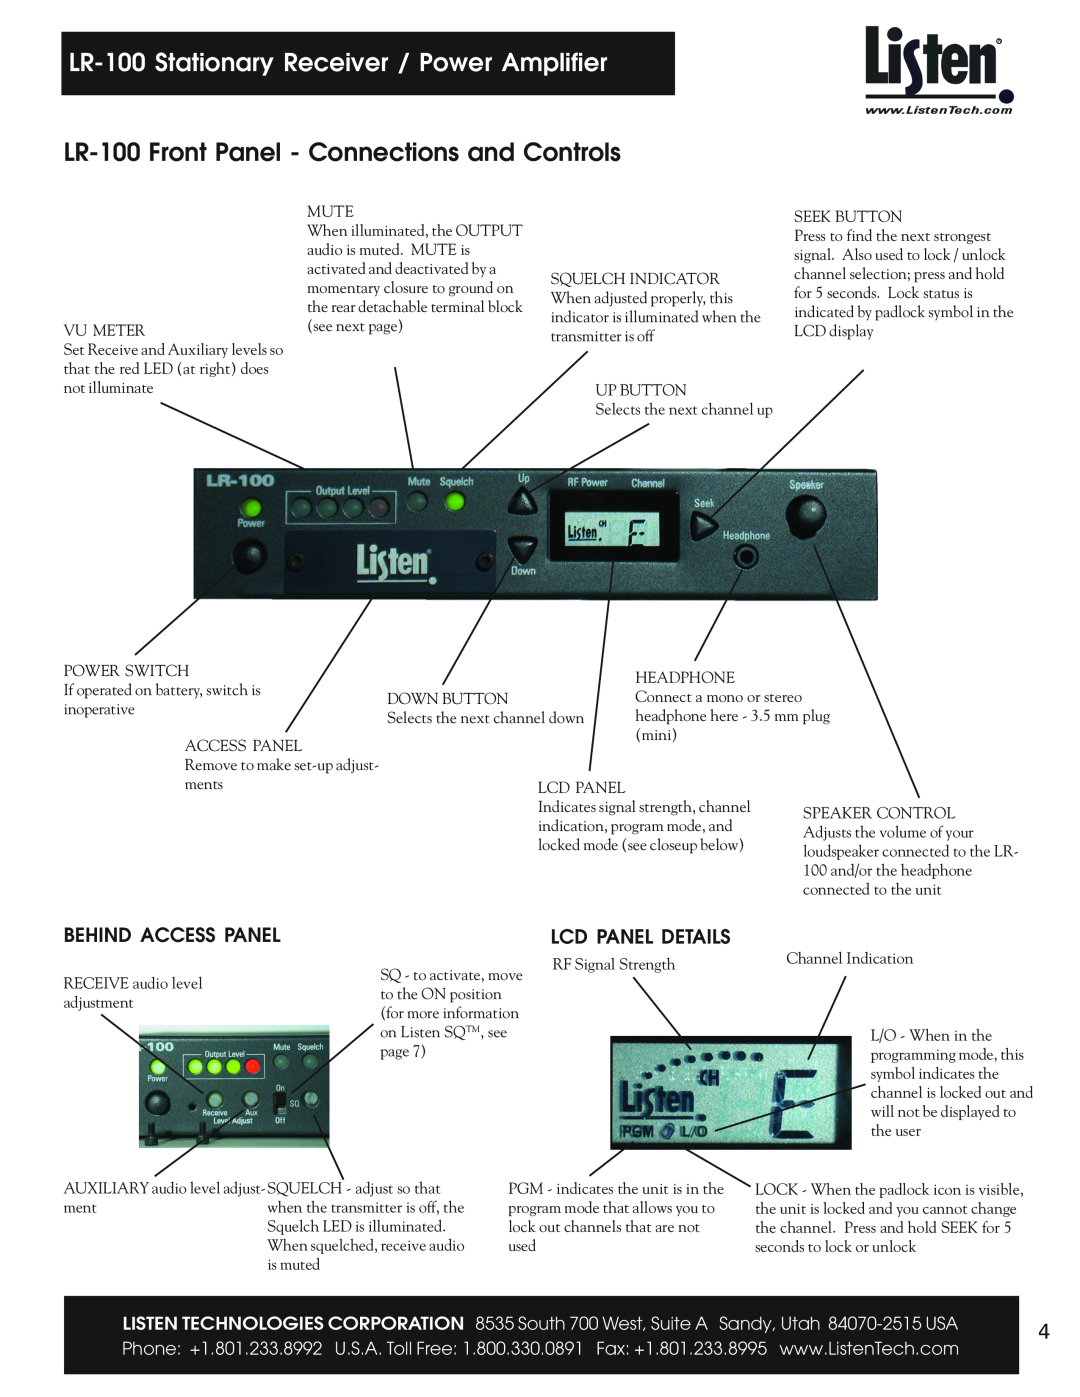 Listen Technologies LR-100Front Panel - Connections and Controls, LR-100Stationary Receiver / Power Amplifier 